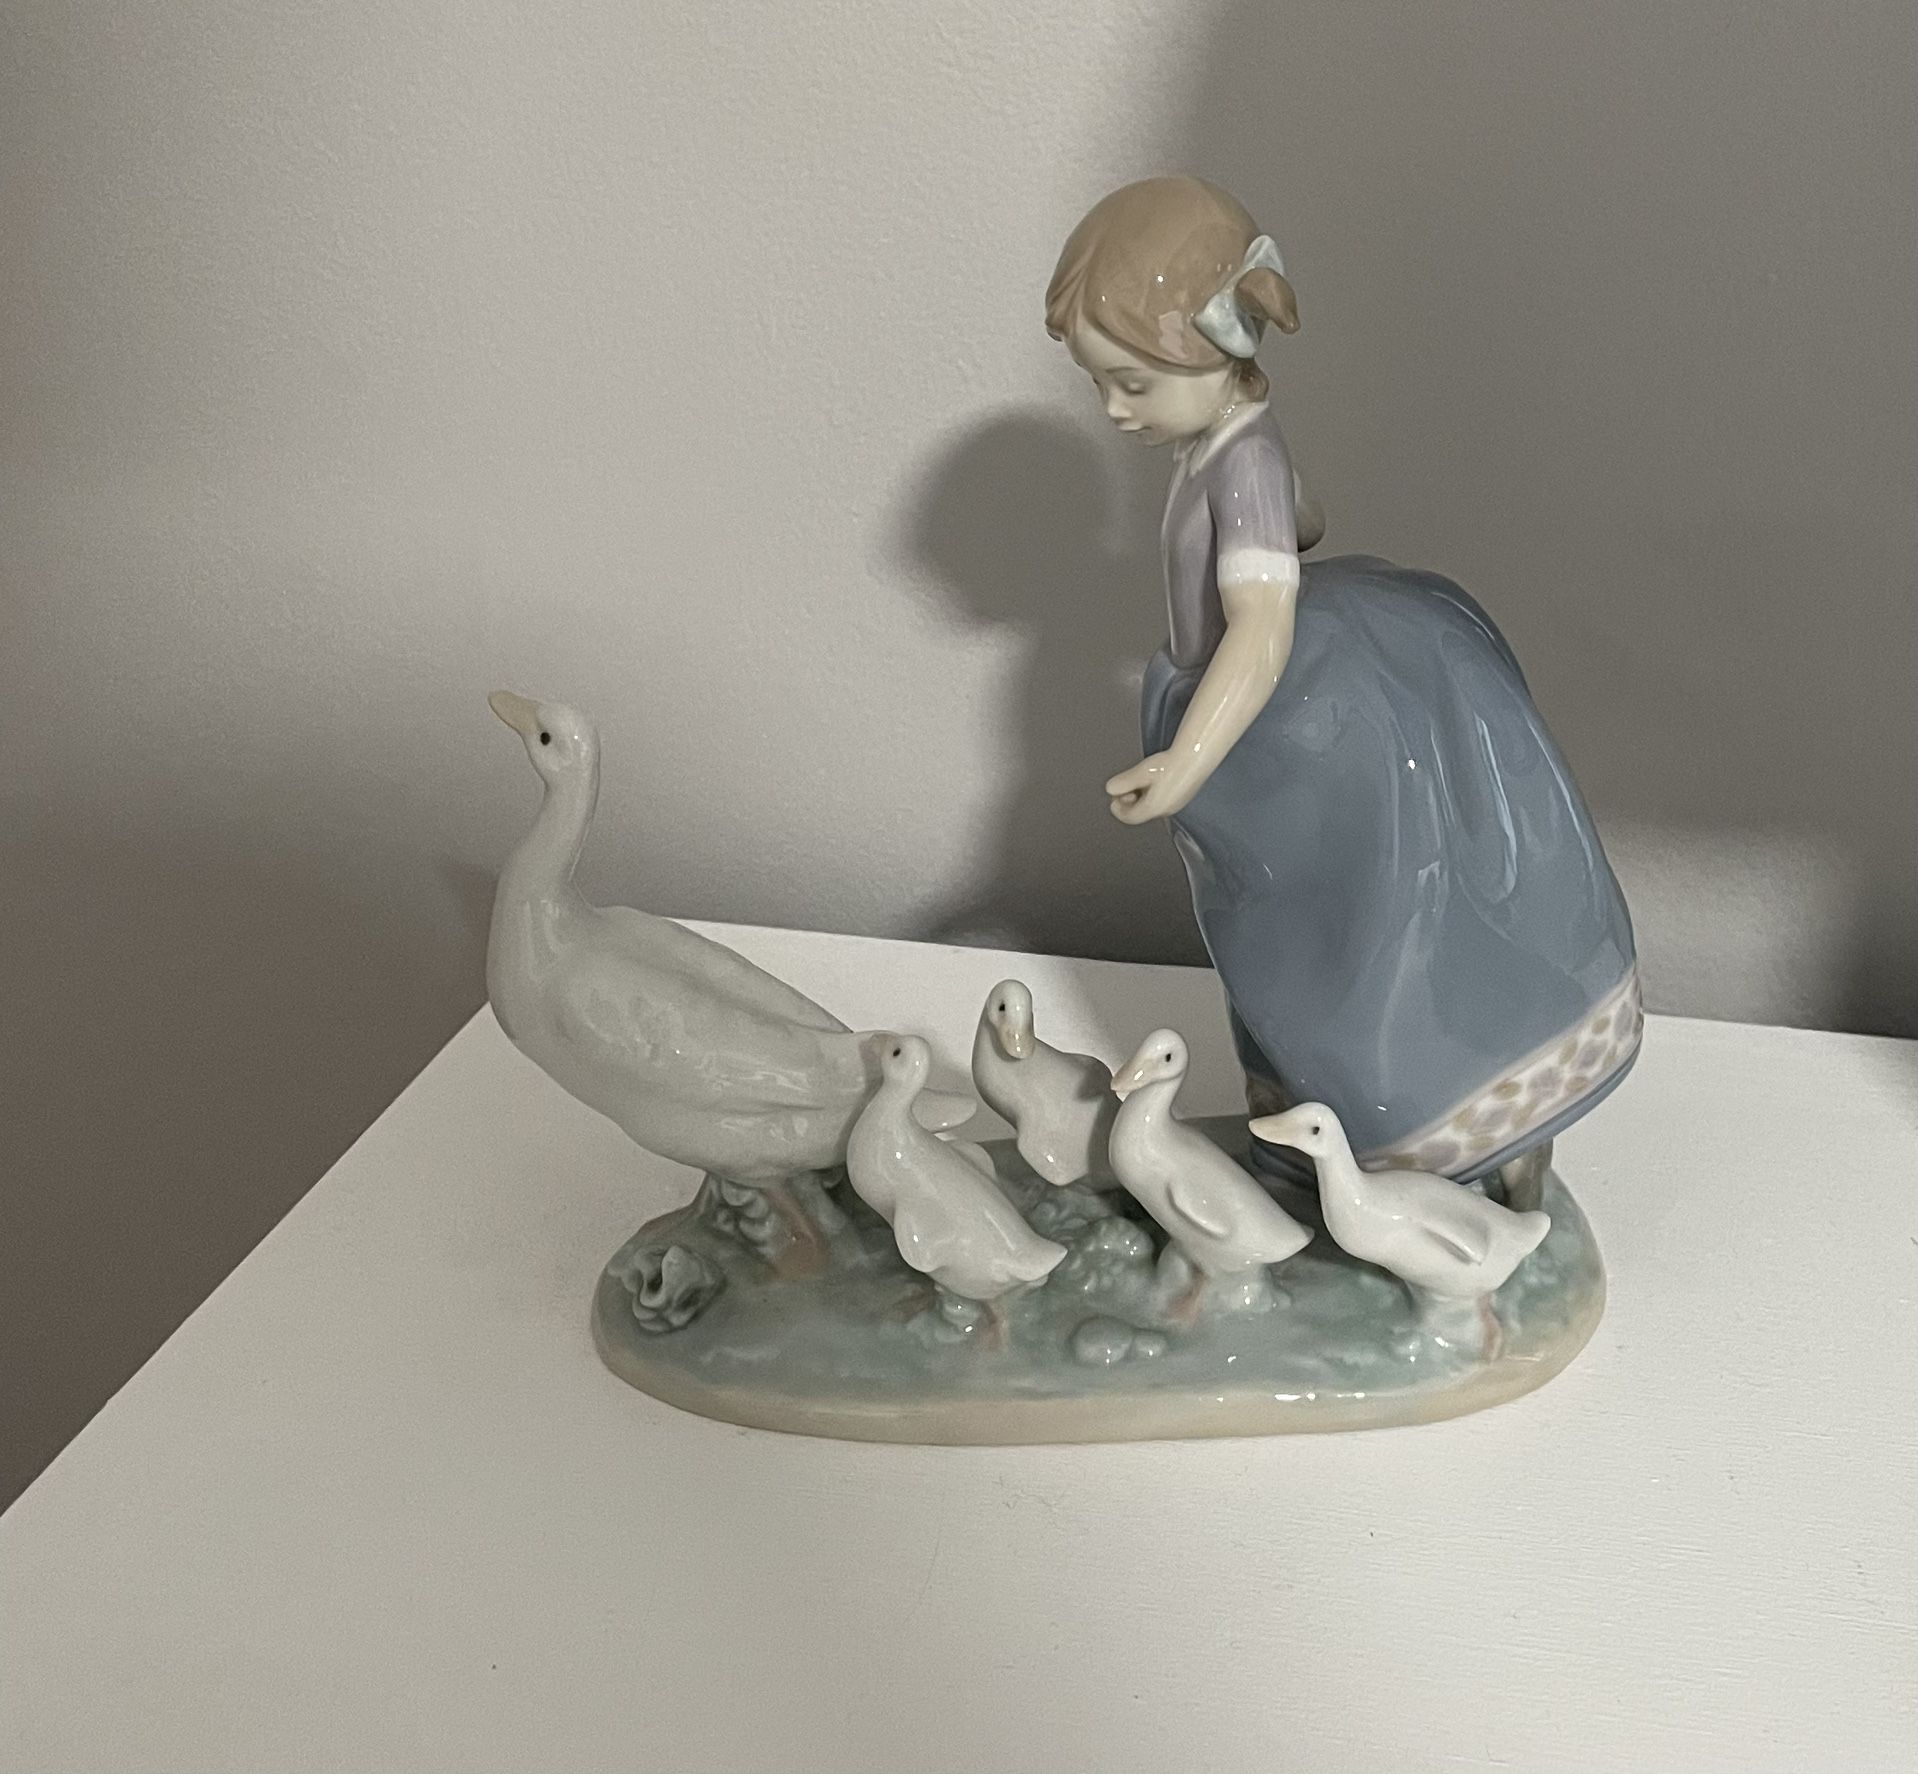 Lladro, Geese, Daughter, Herder, Ducks, Beautiful, Authentic With Real Markings, Swans, Baby, Statue